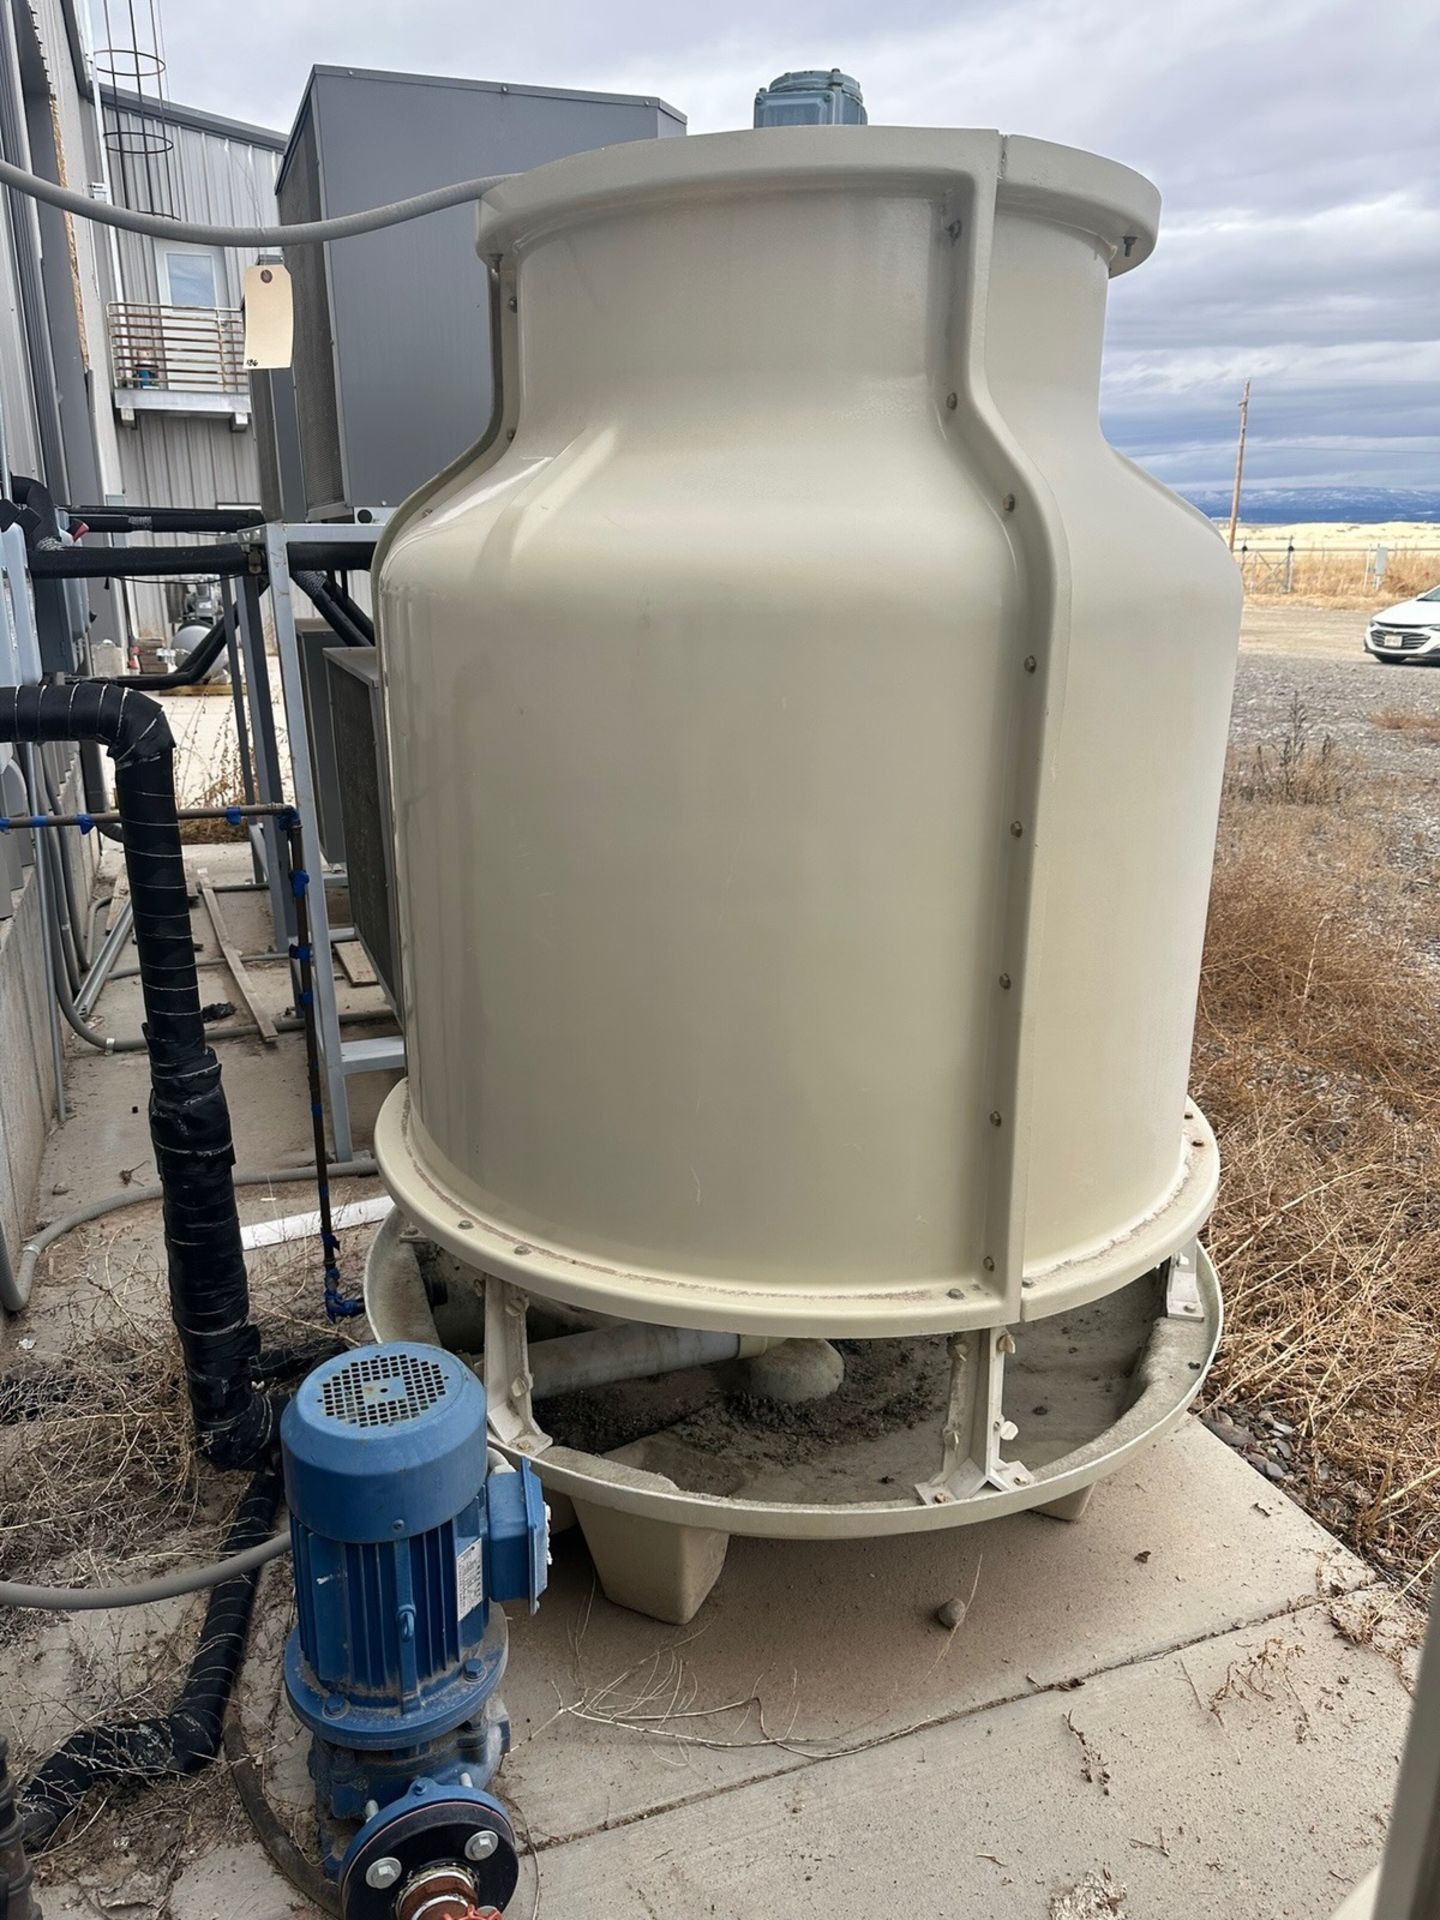 Mini Cooling Tower for Fluid Circulating Water System | Rig Fee $175 - Image 2 of 4